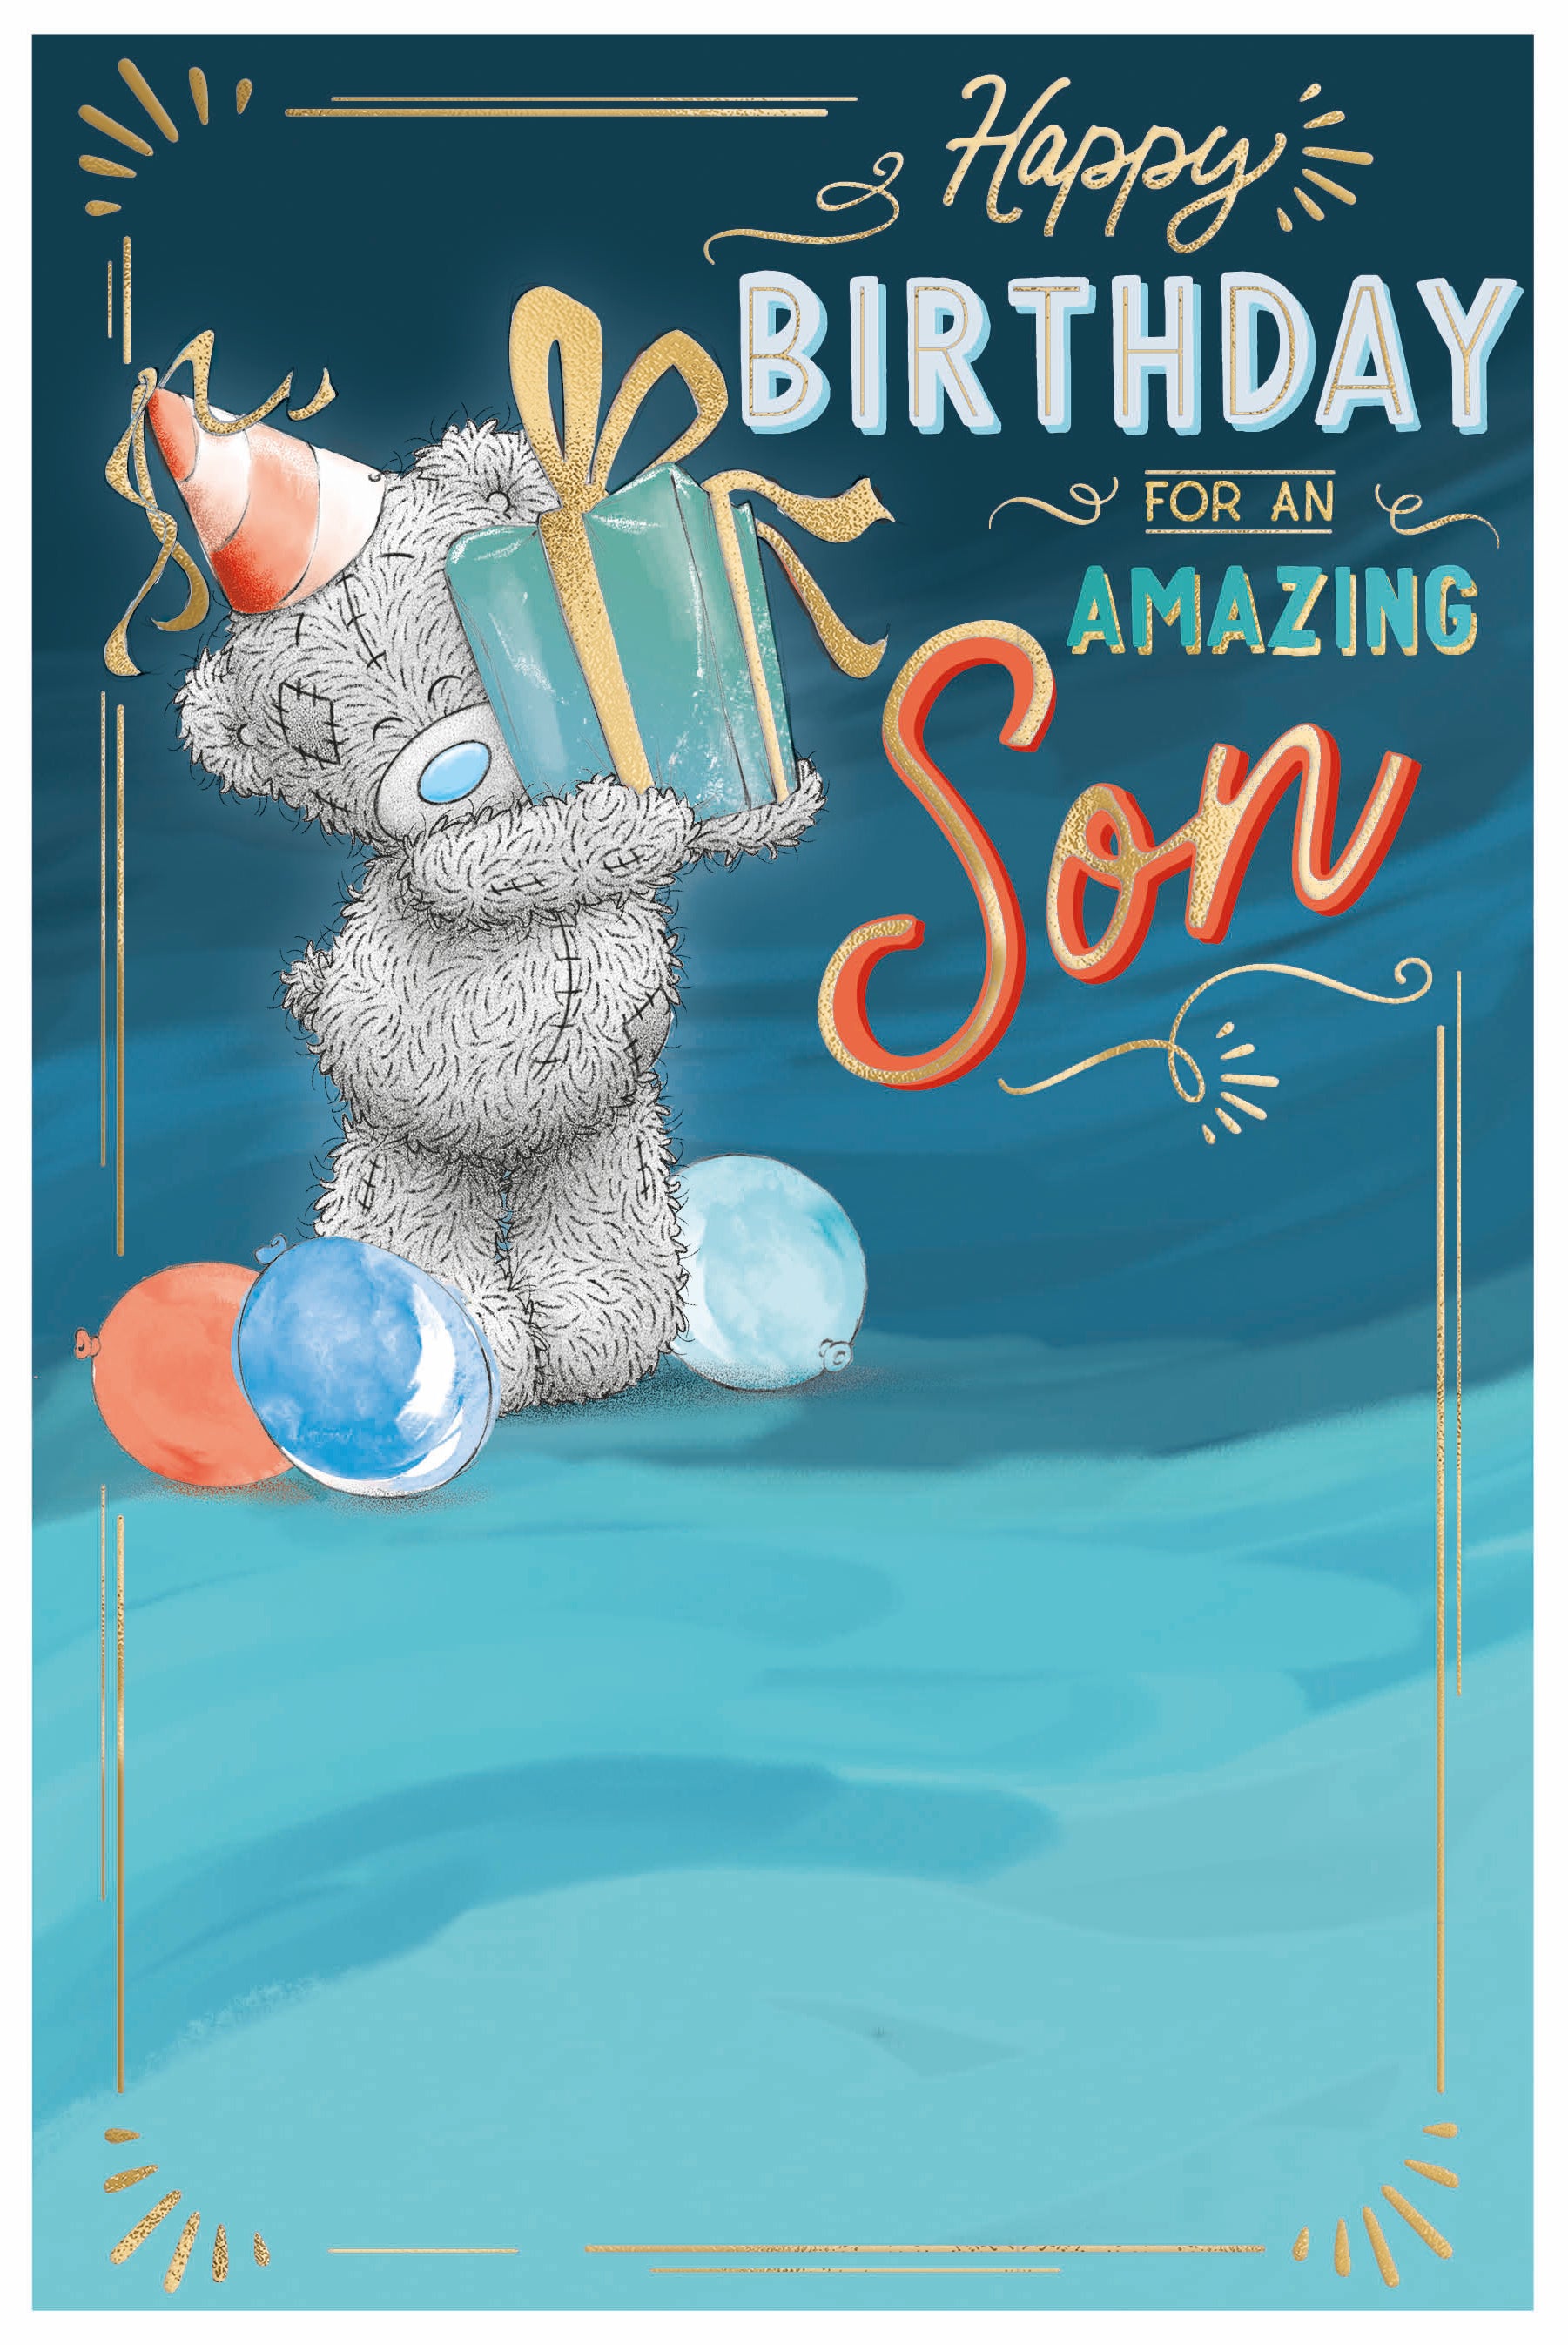 Son Birthday Card - Bear In Party Hat And Gift